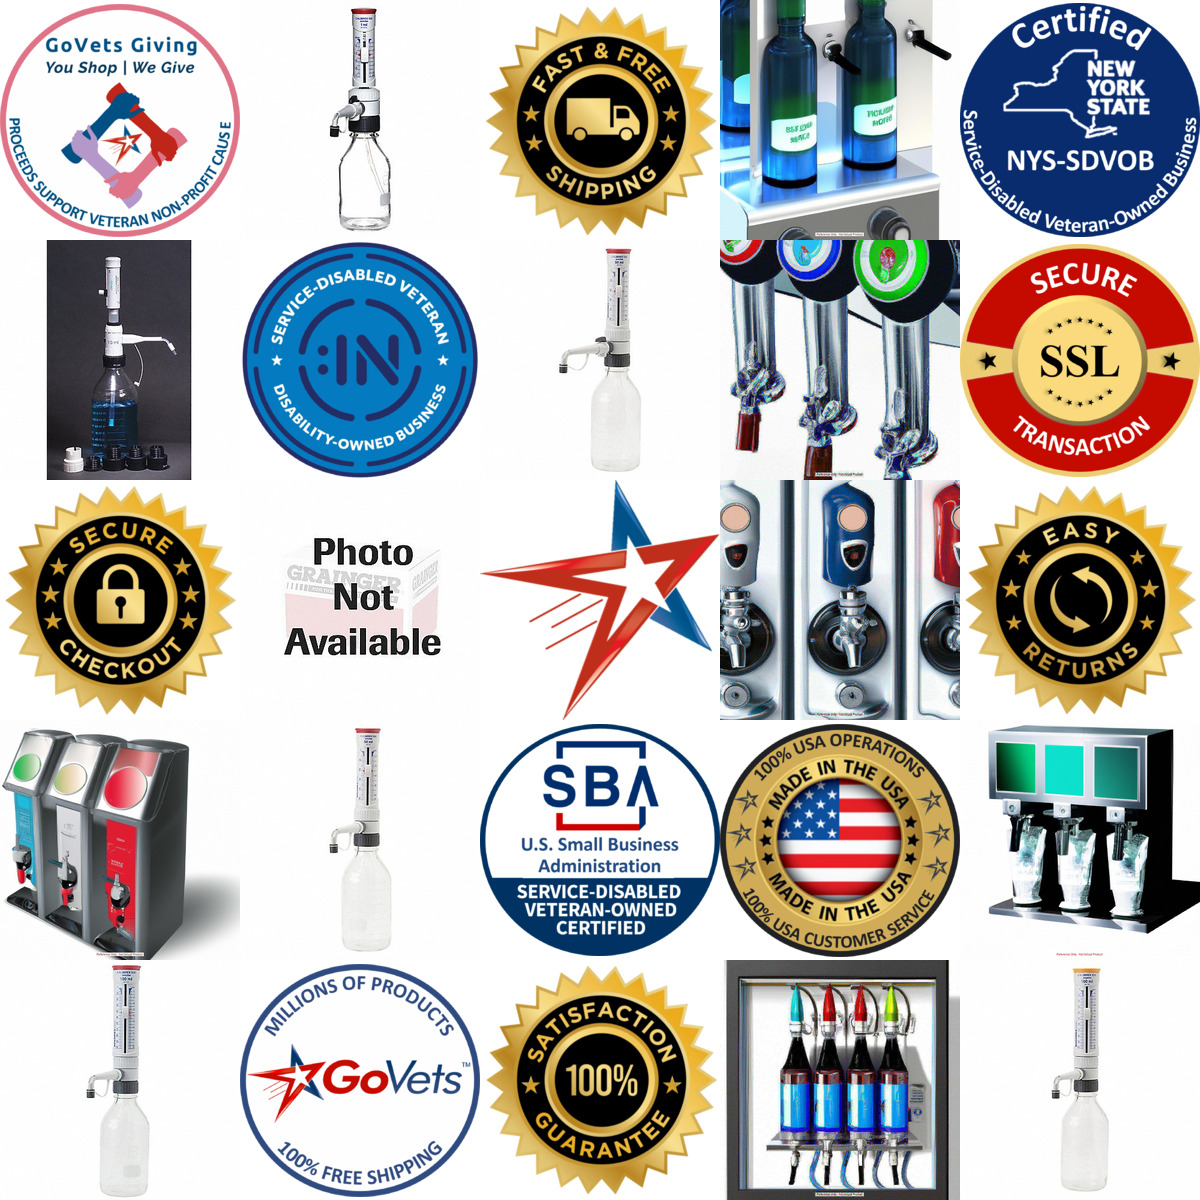 A selection of Bottle Top Dispensers products on GoVets